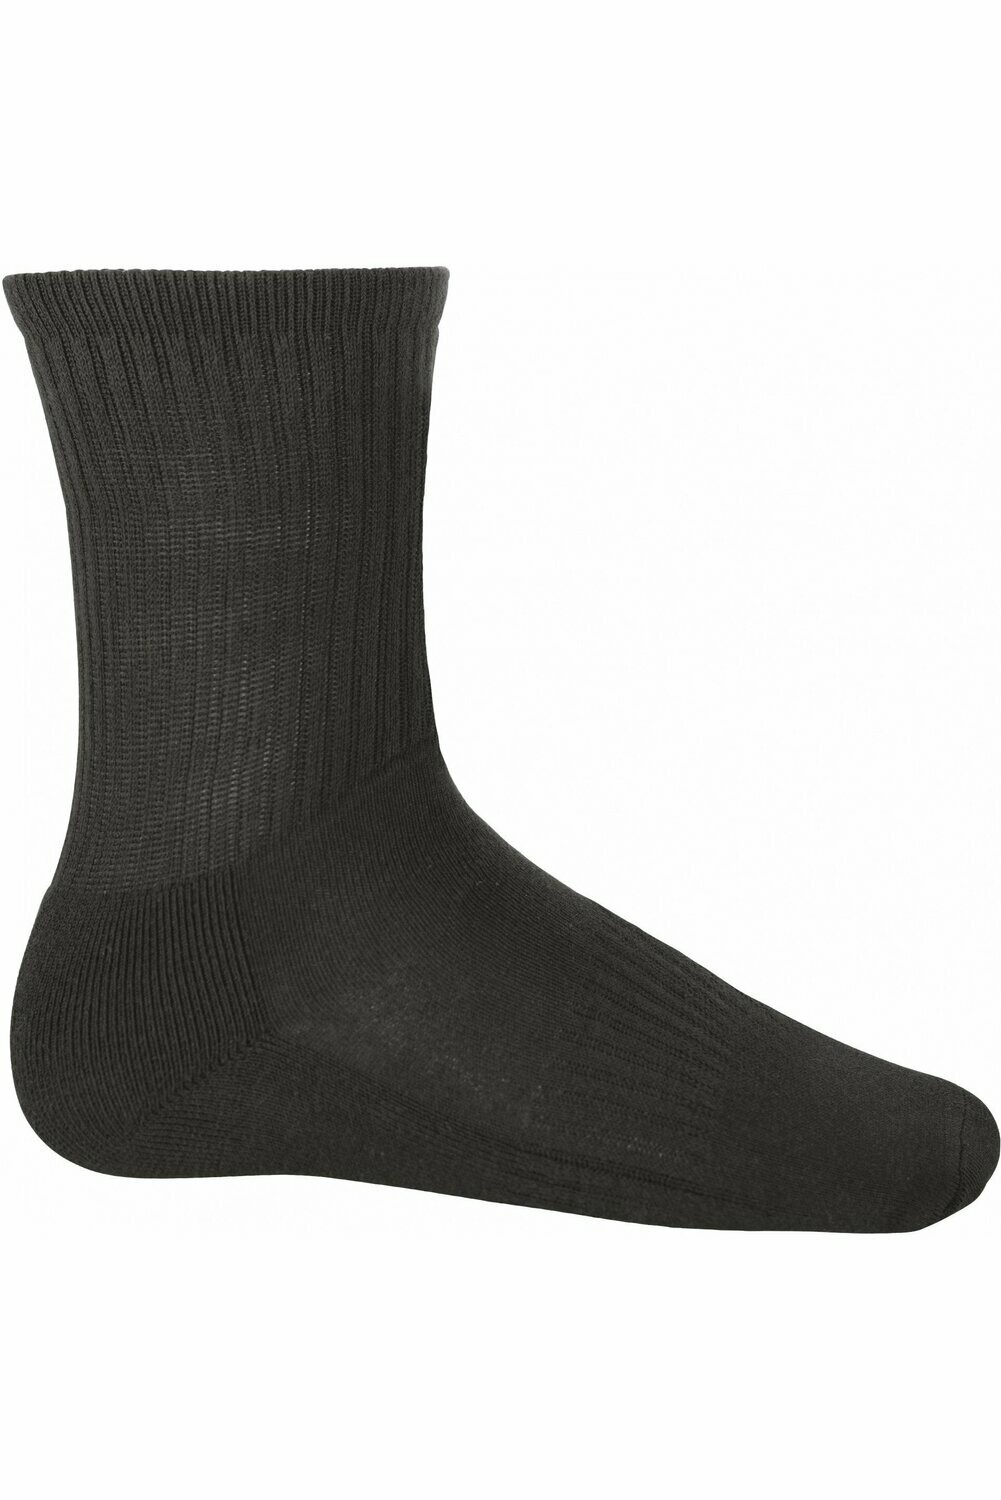 CHAUSSETTES MULTISPORTS